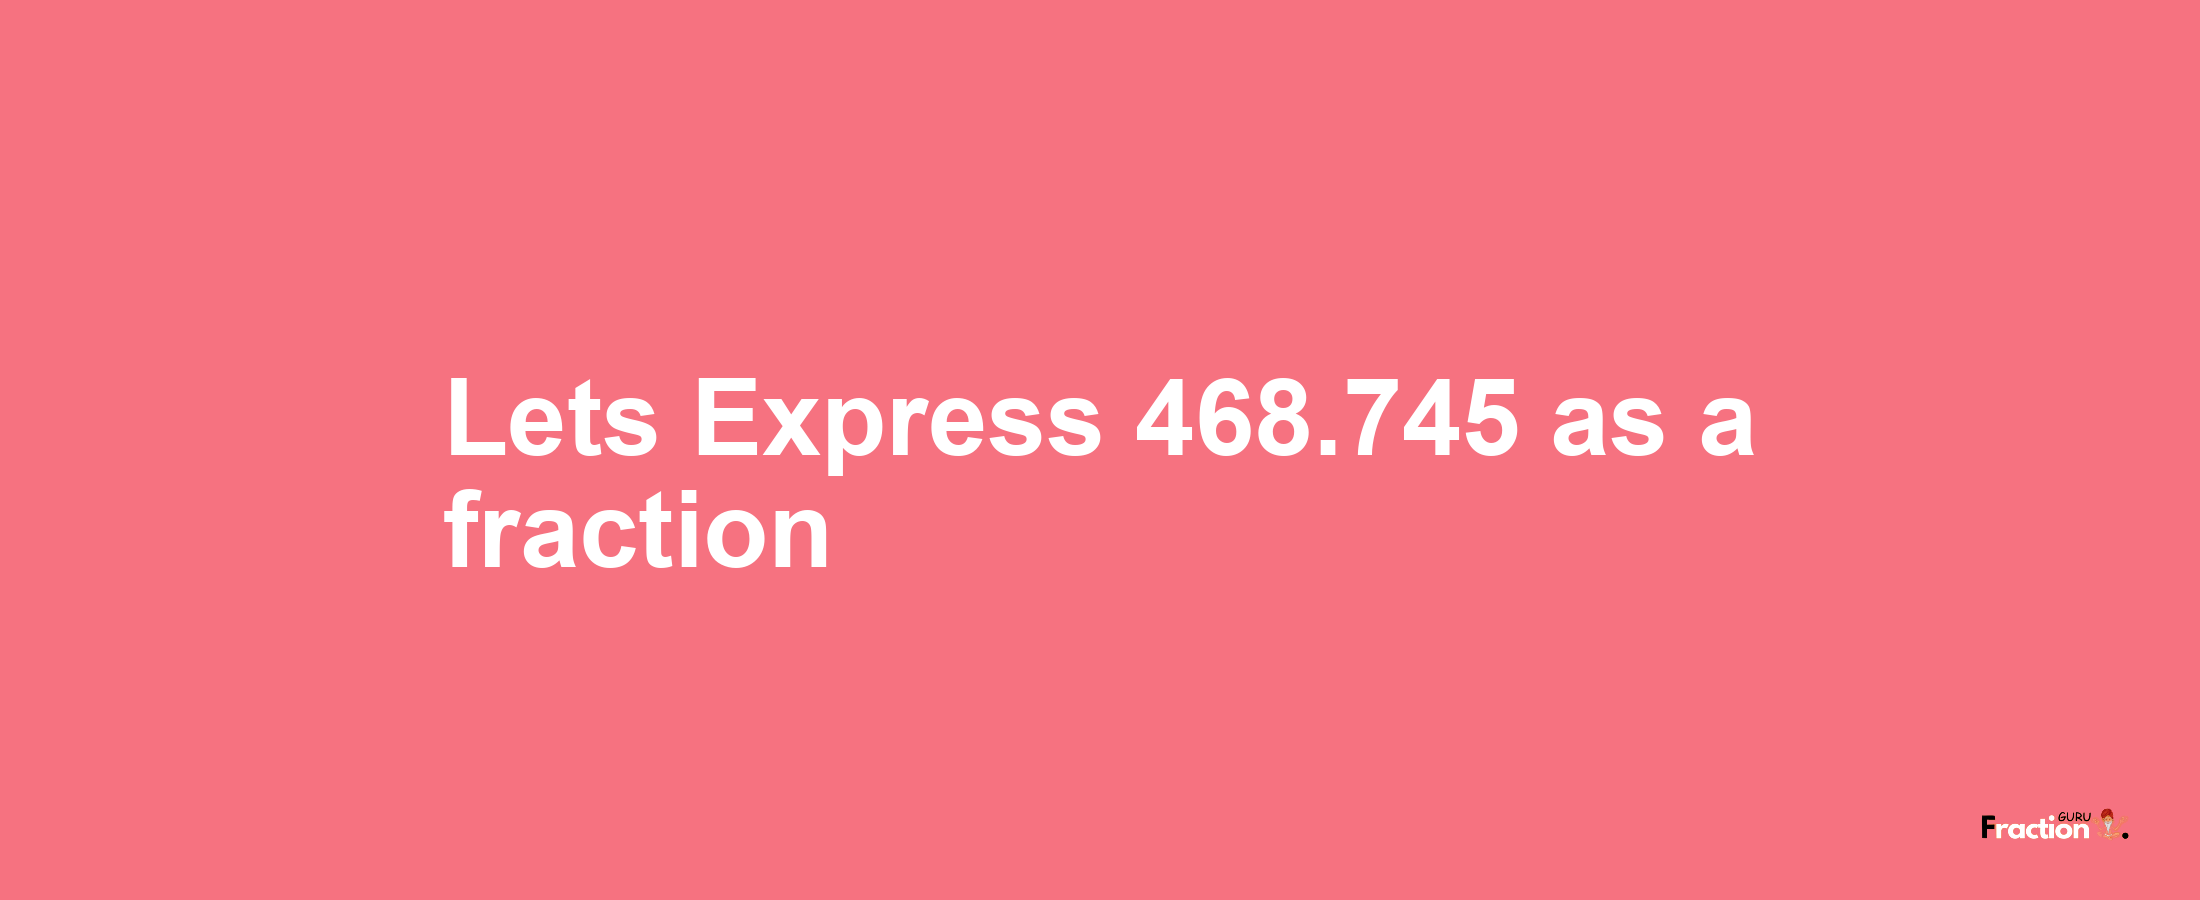 Lets Express 468.745 as afraction